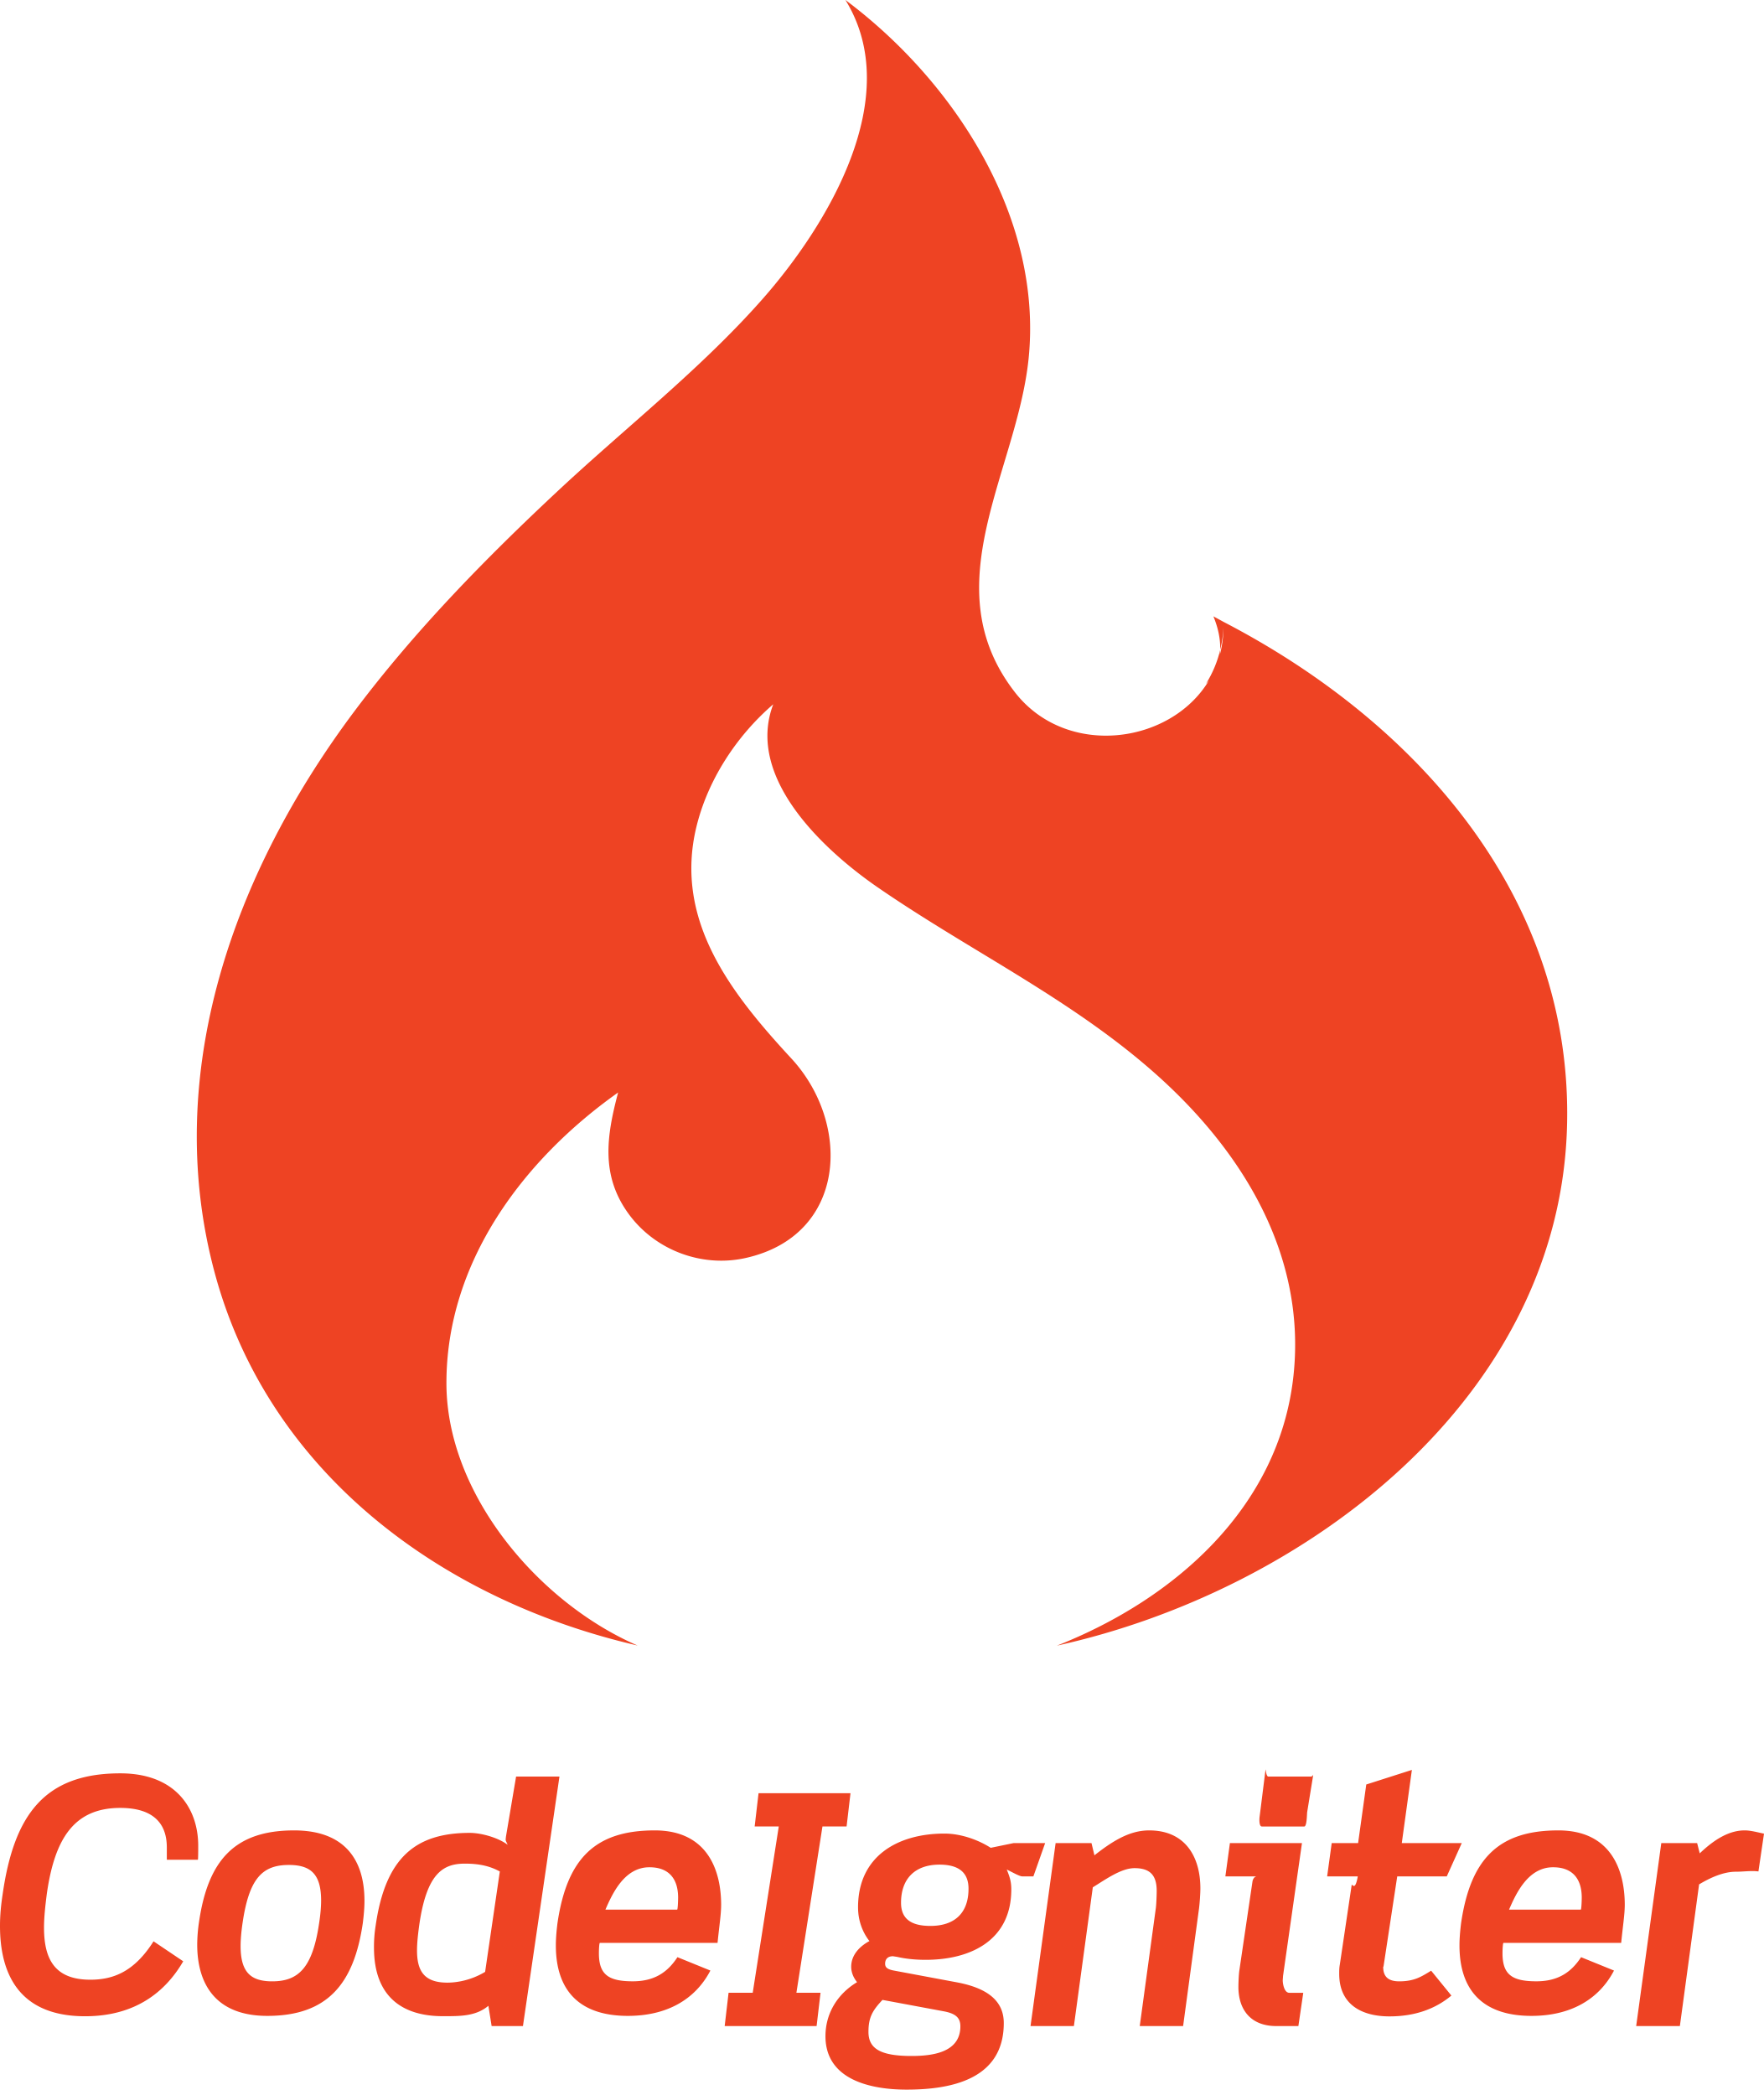 CodeIgniter Official Brand Red logo colors